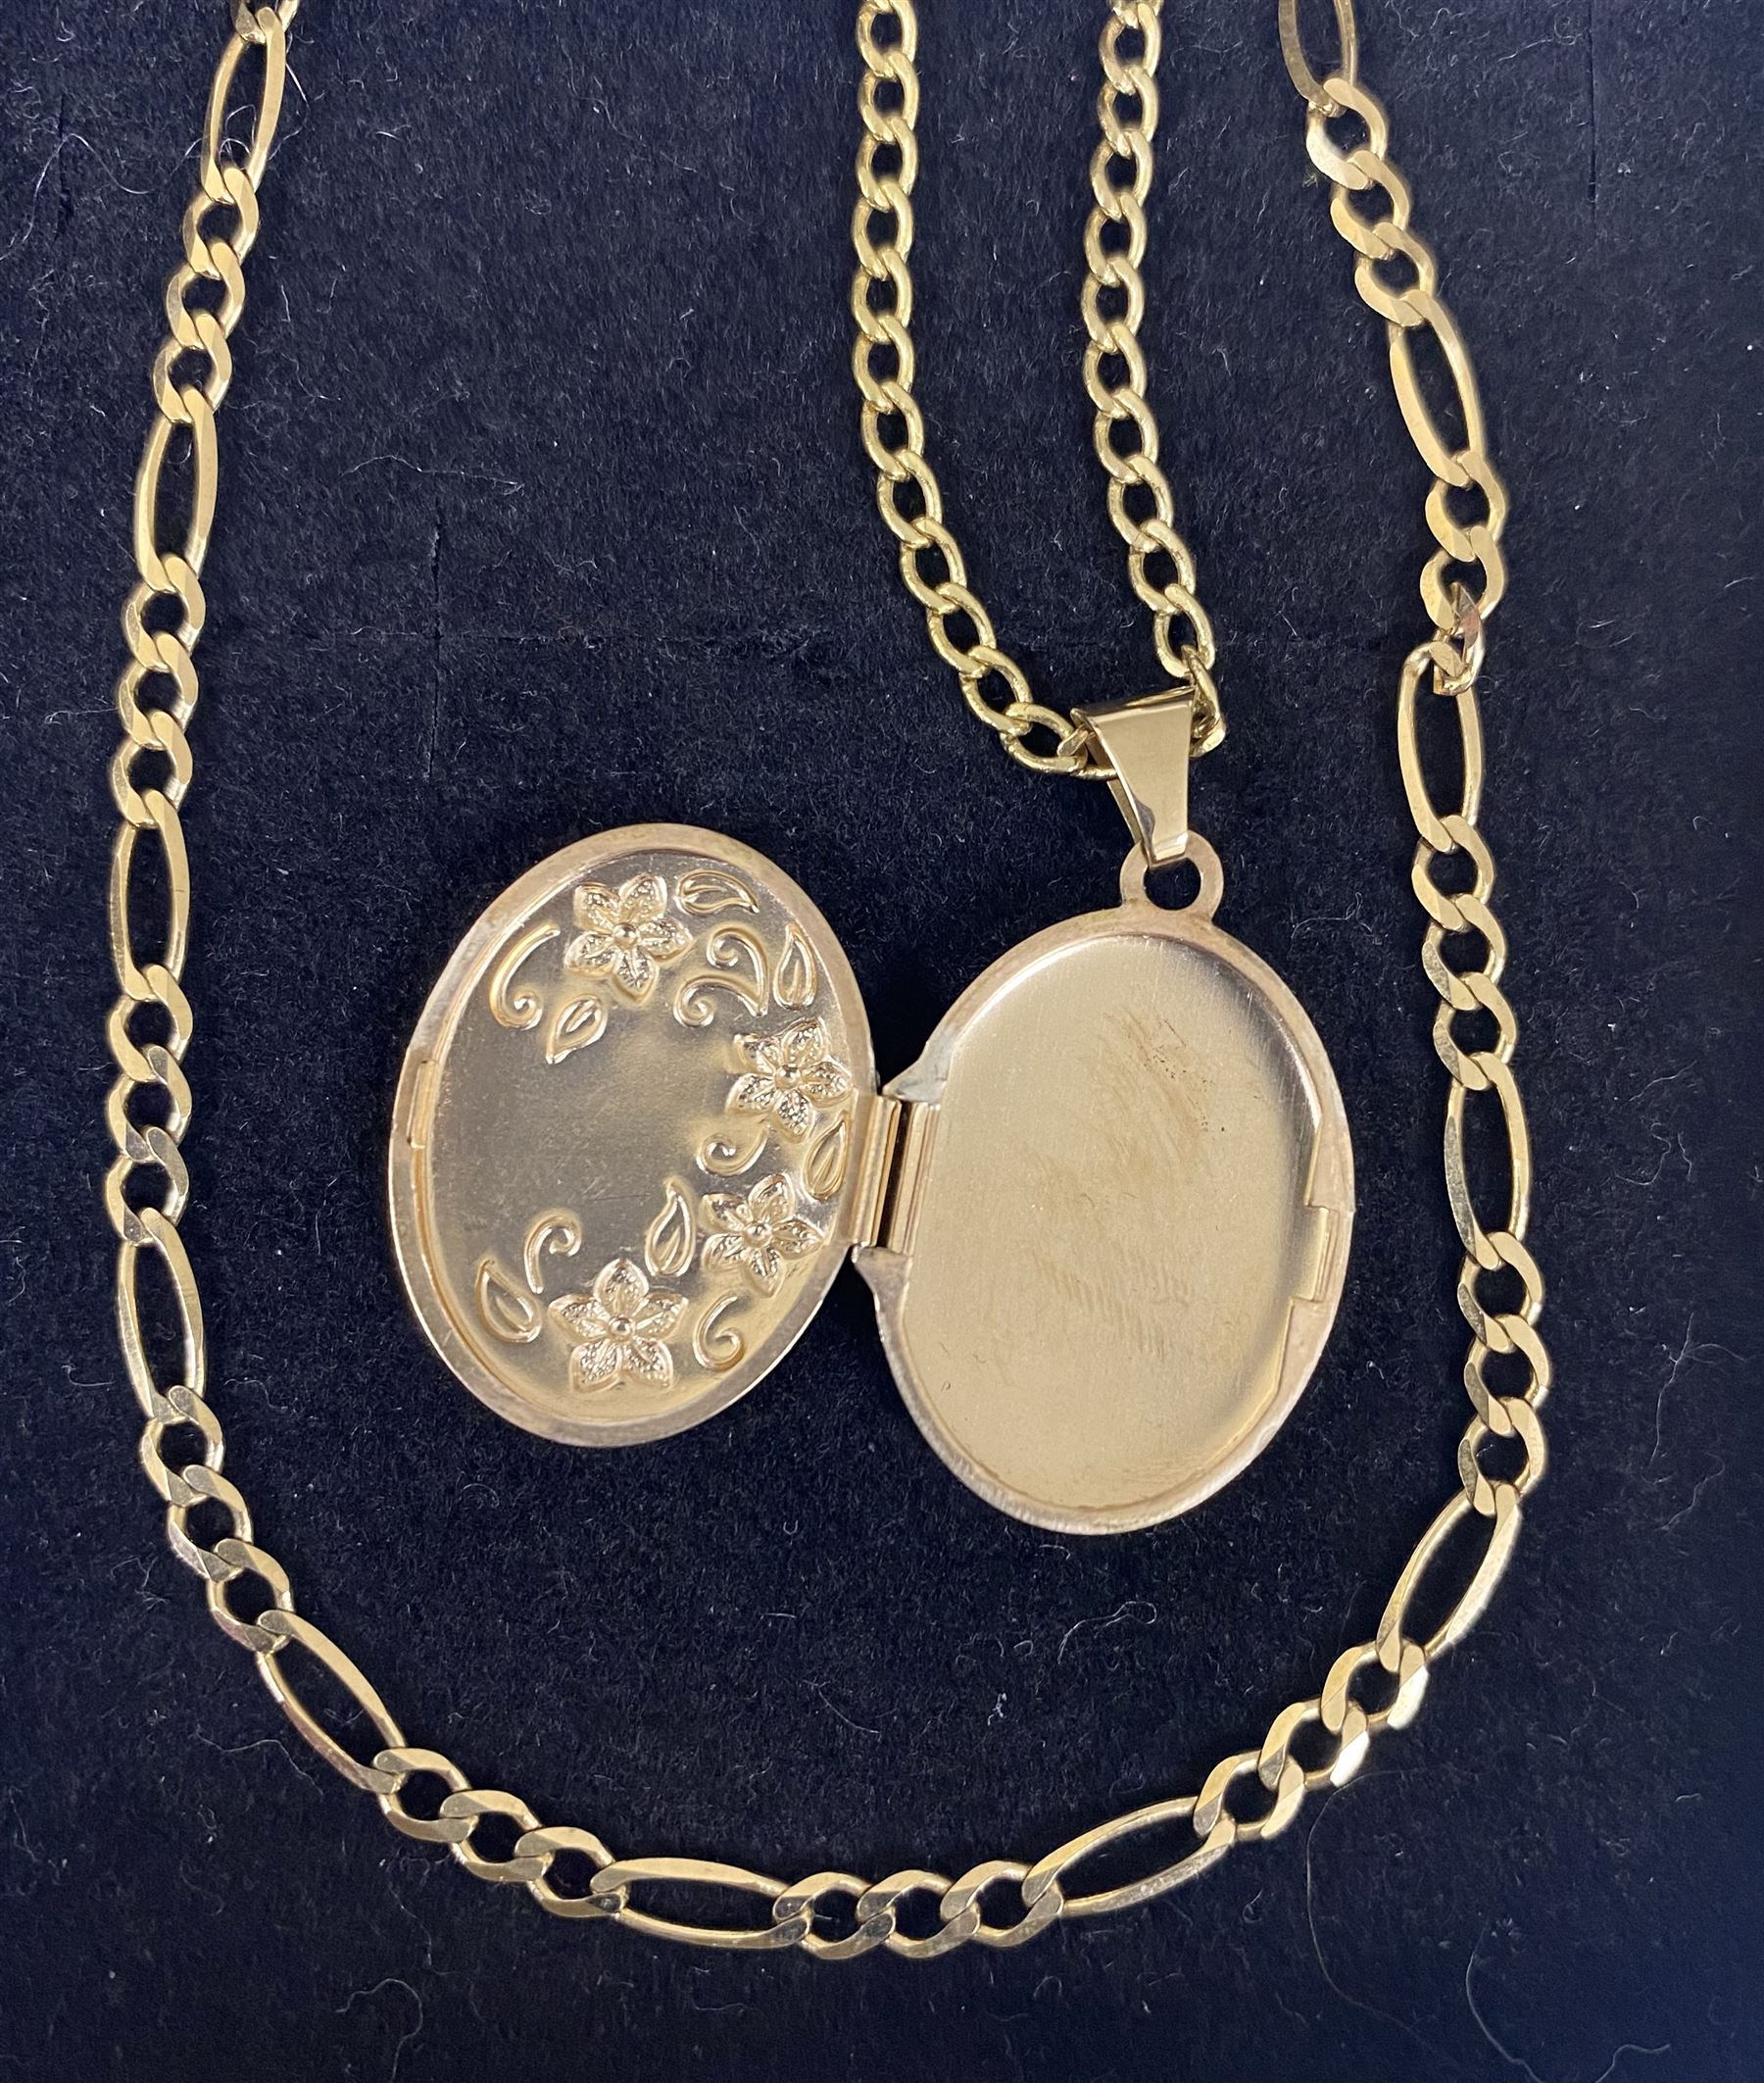 9ct gold oval locket pendant necklace with floral decoration and a 9ct gold Figaro link necklace - Image 3 of 3